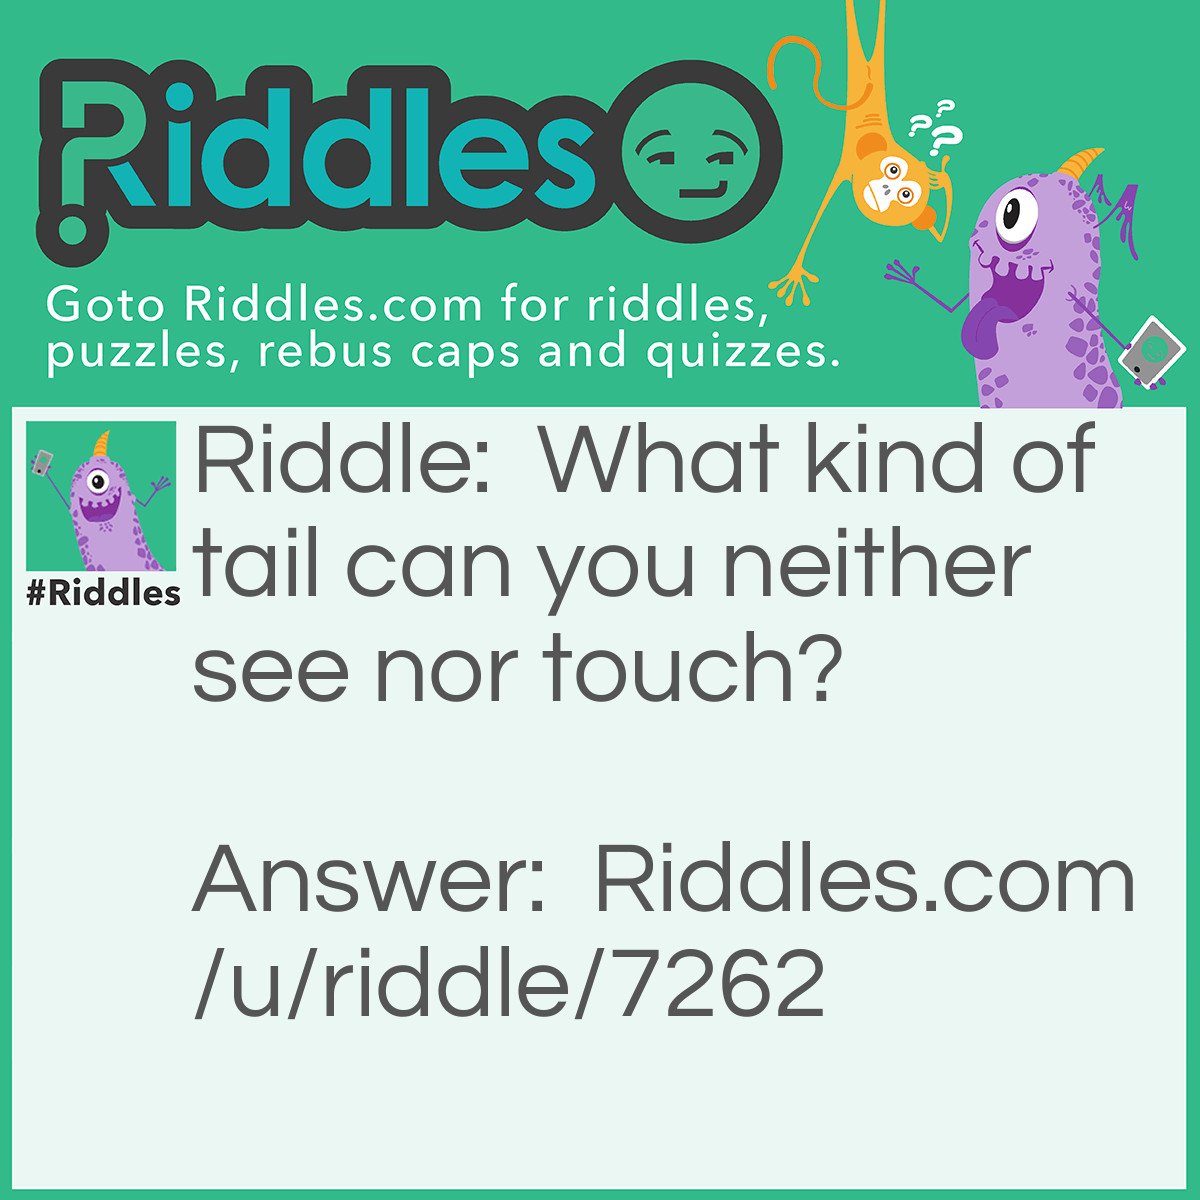 Riddle: What kind of tail can you neither see nor touch? Answer: Cocktail.